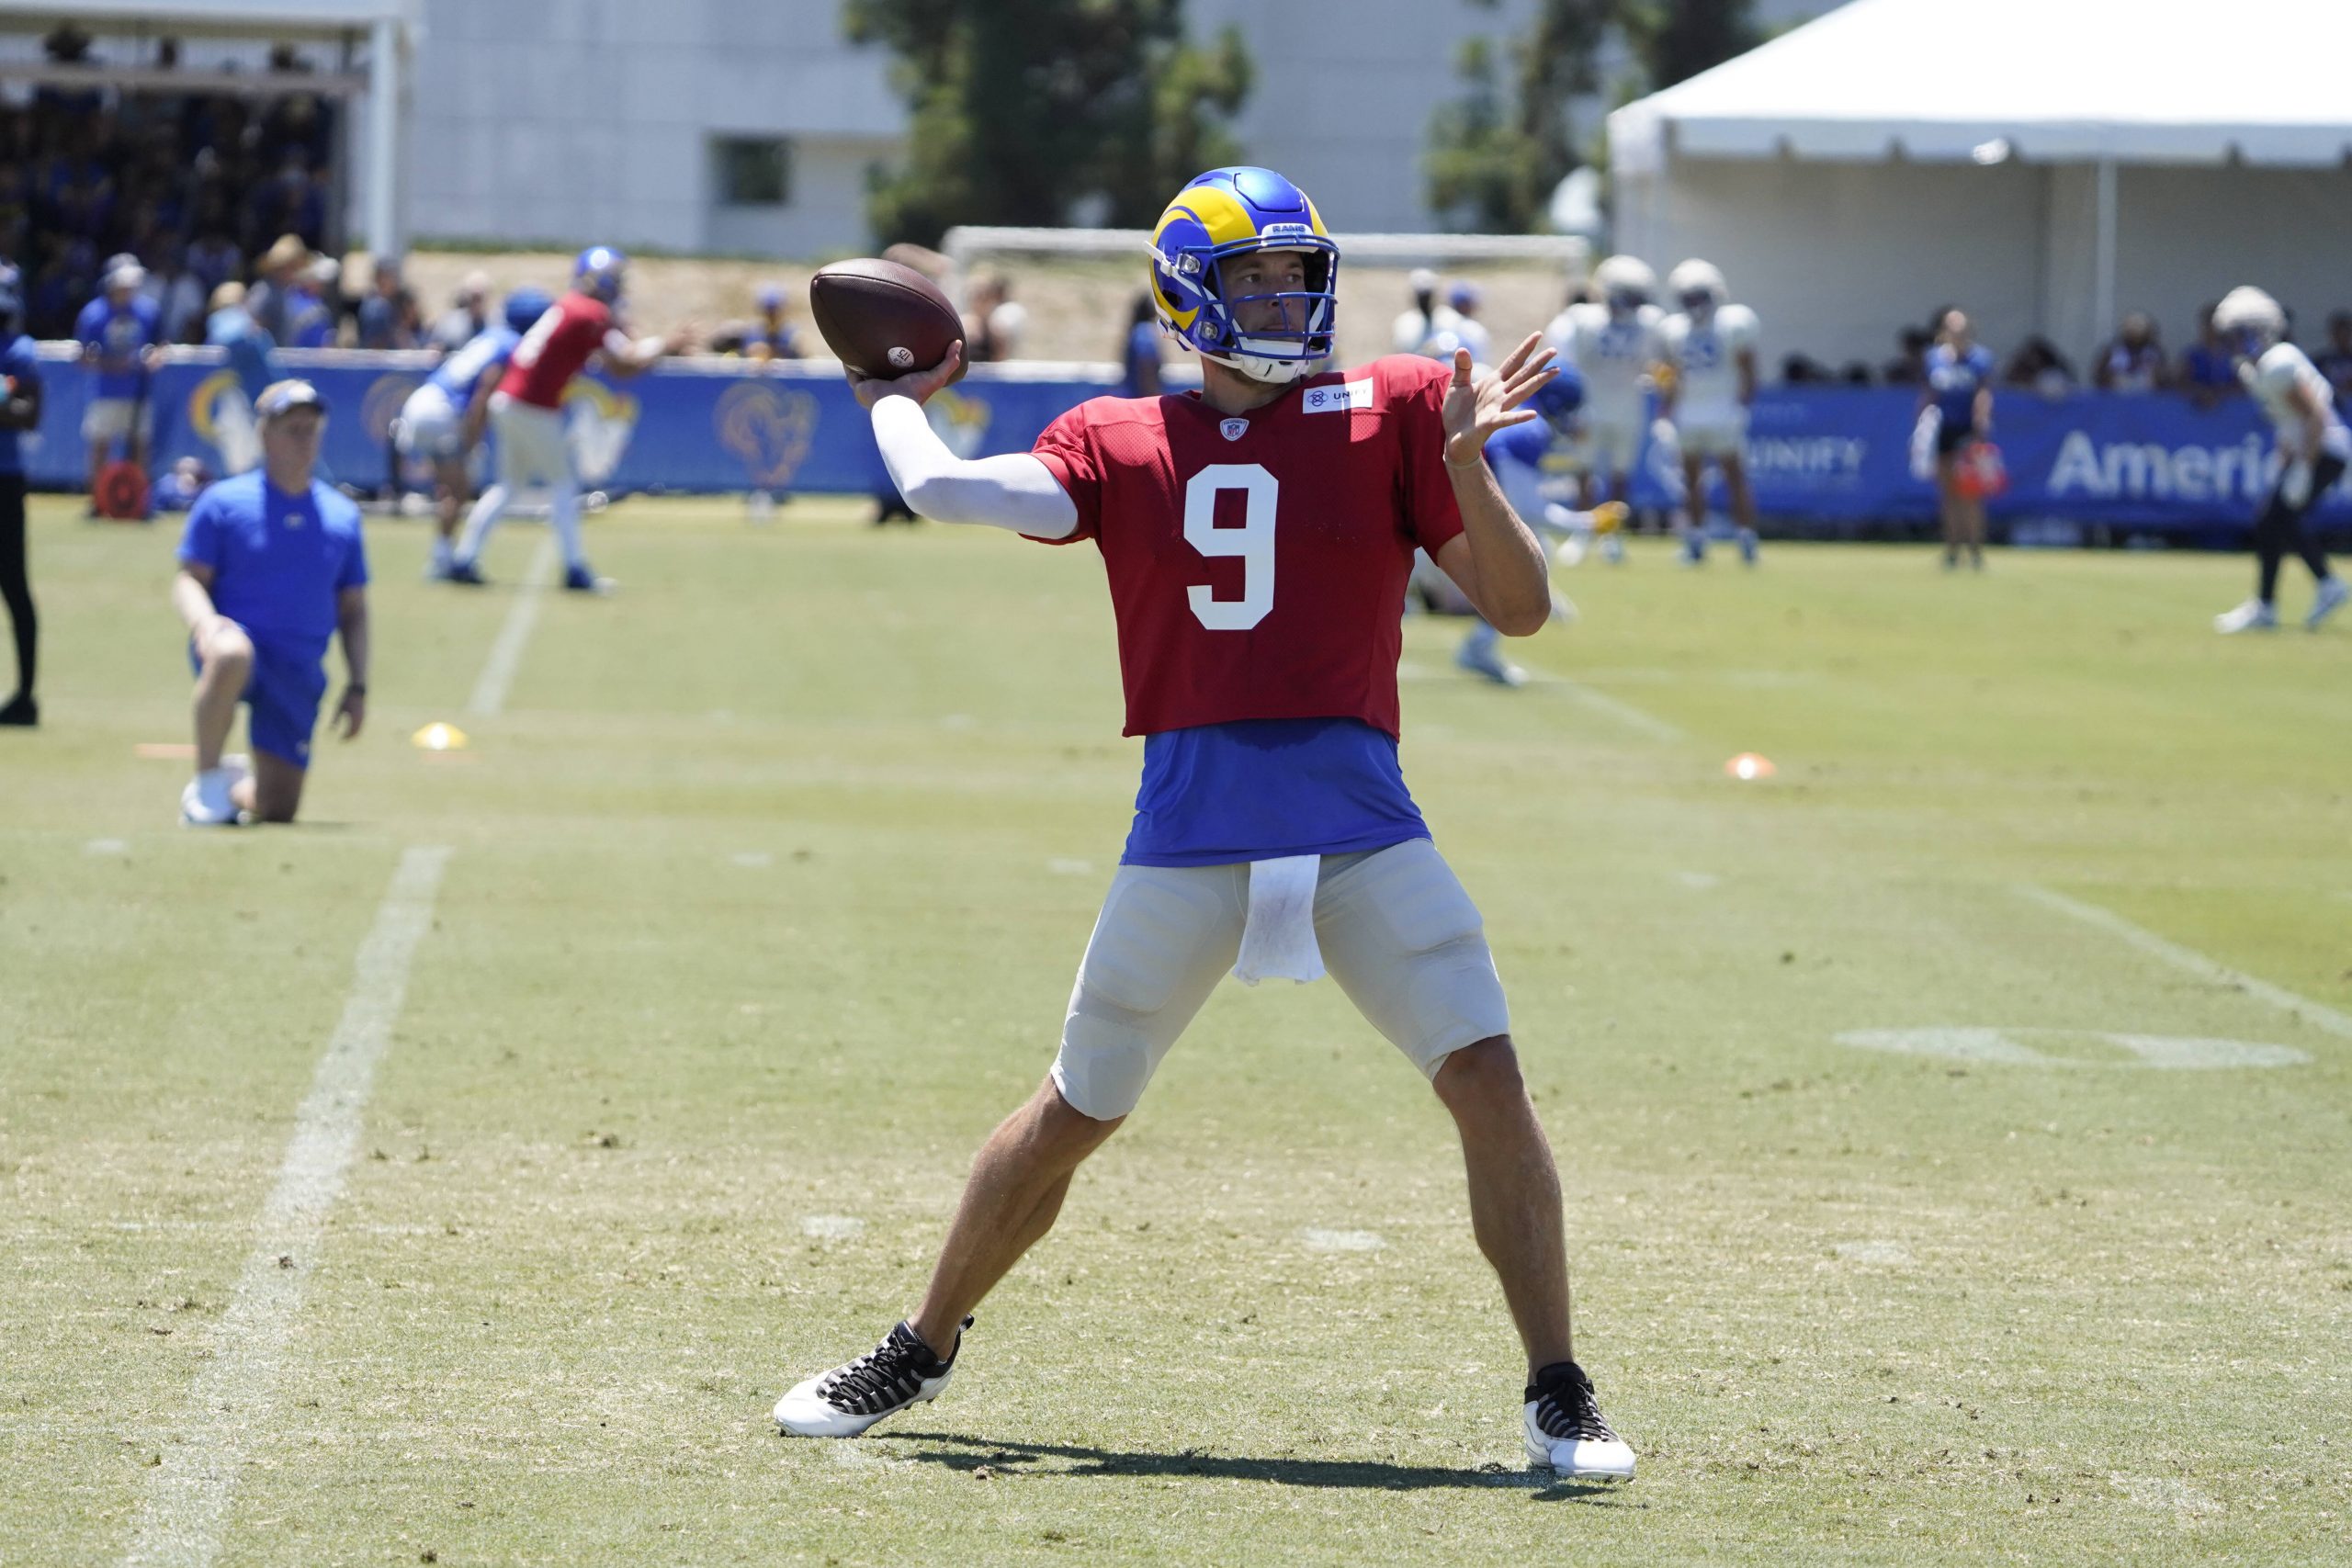 IRVINE, CA - AUGUST 06: Matthew Stafford 9 of the Rams works out during the Los Angeles Rams Training Camp on August 06, 2022, at UC Irvine in Irvine, CA. Photo by Icon Sportswire NFL, American Football Herren, USA AUG 06 Los Angeles Rams Training Camp Icon592220806323